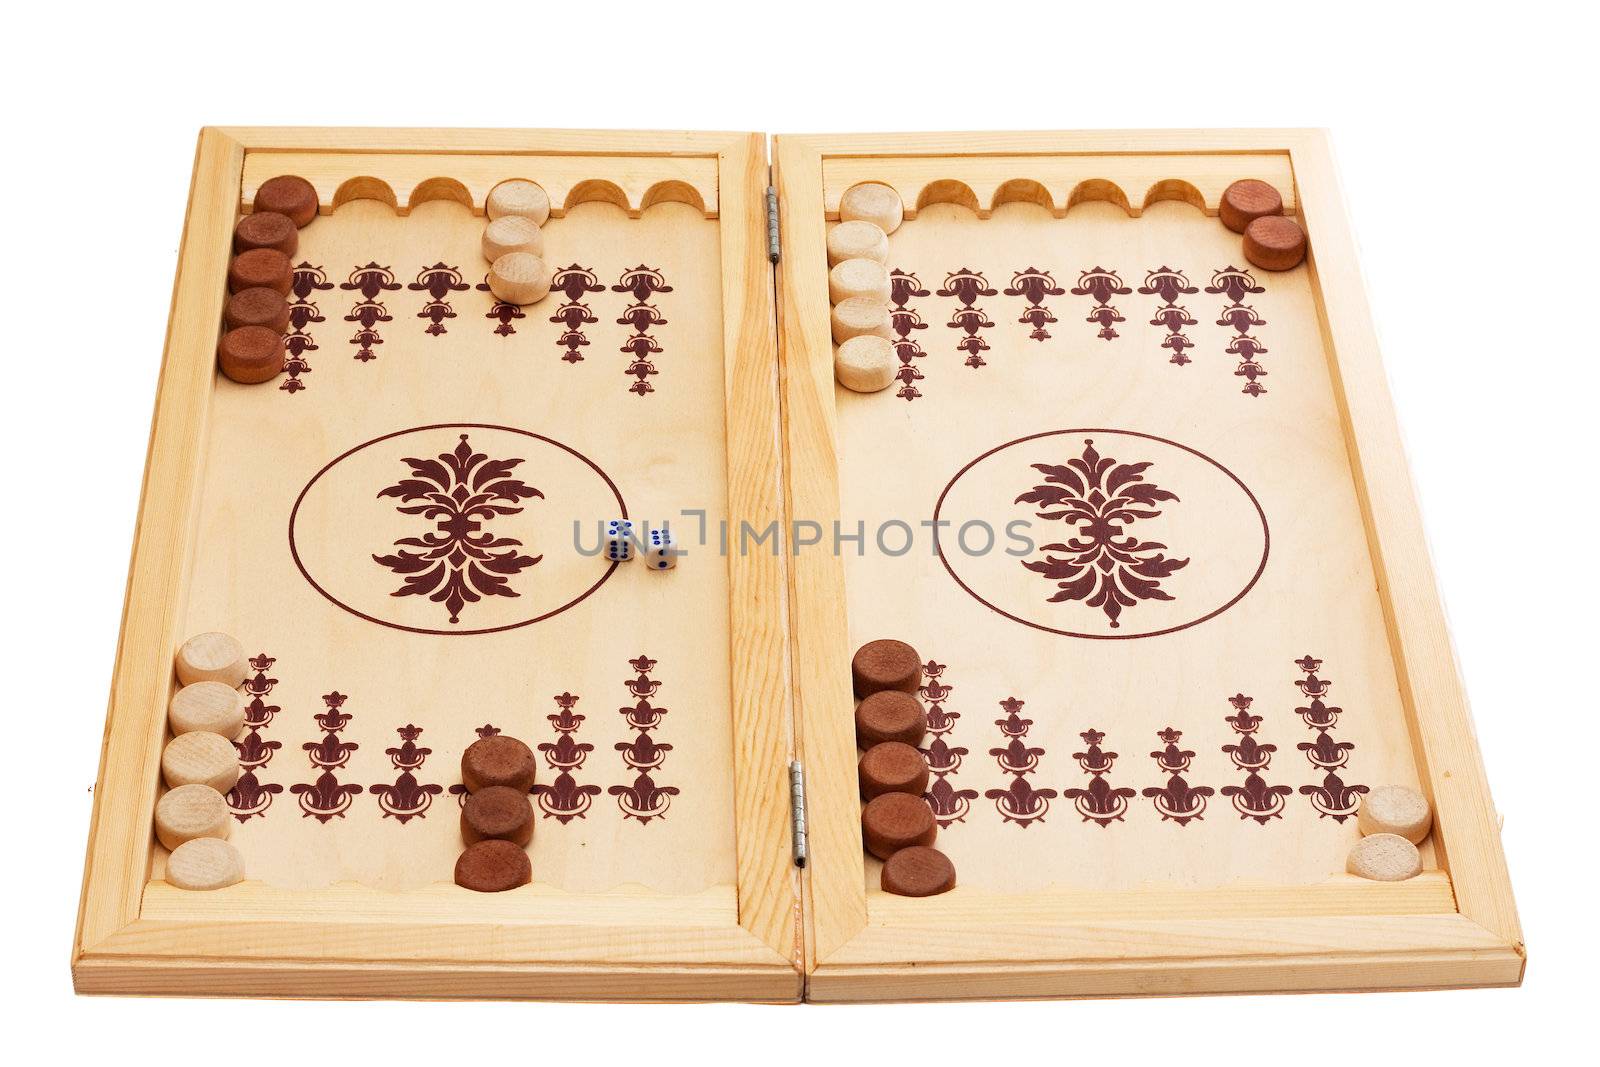 View of dice and game pieces on a backgammon board at the beginning of a game